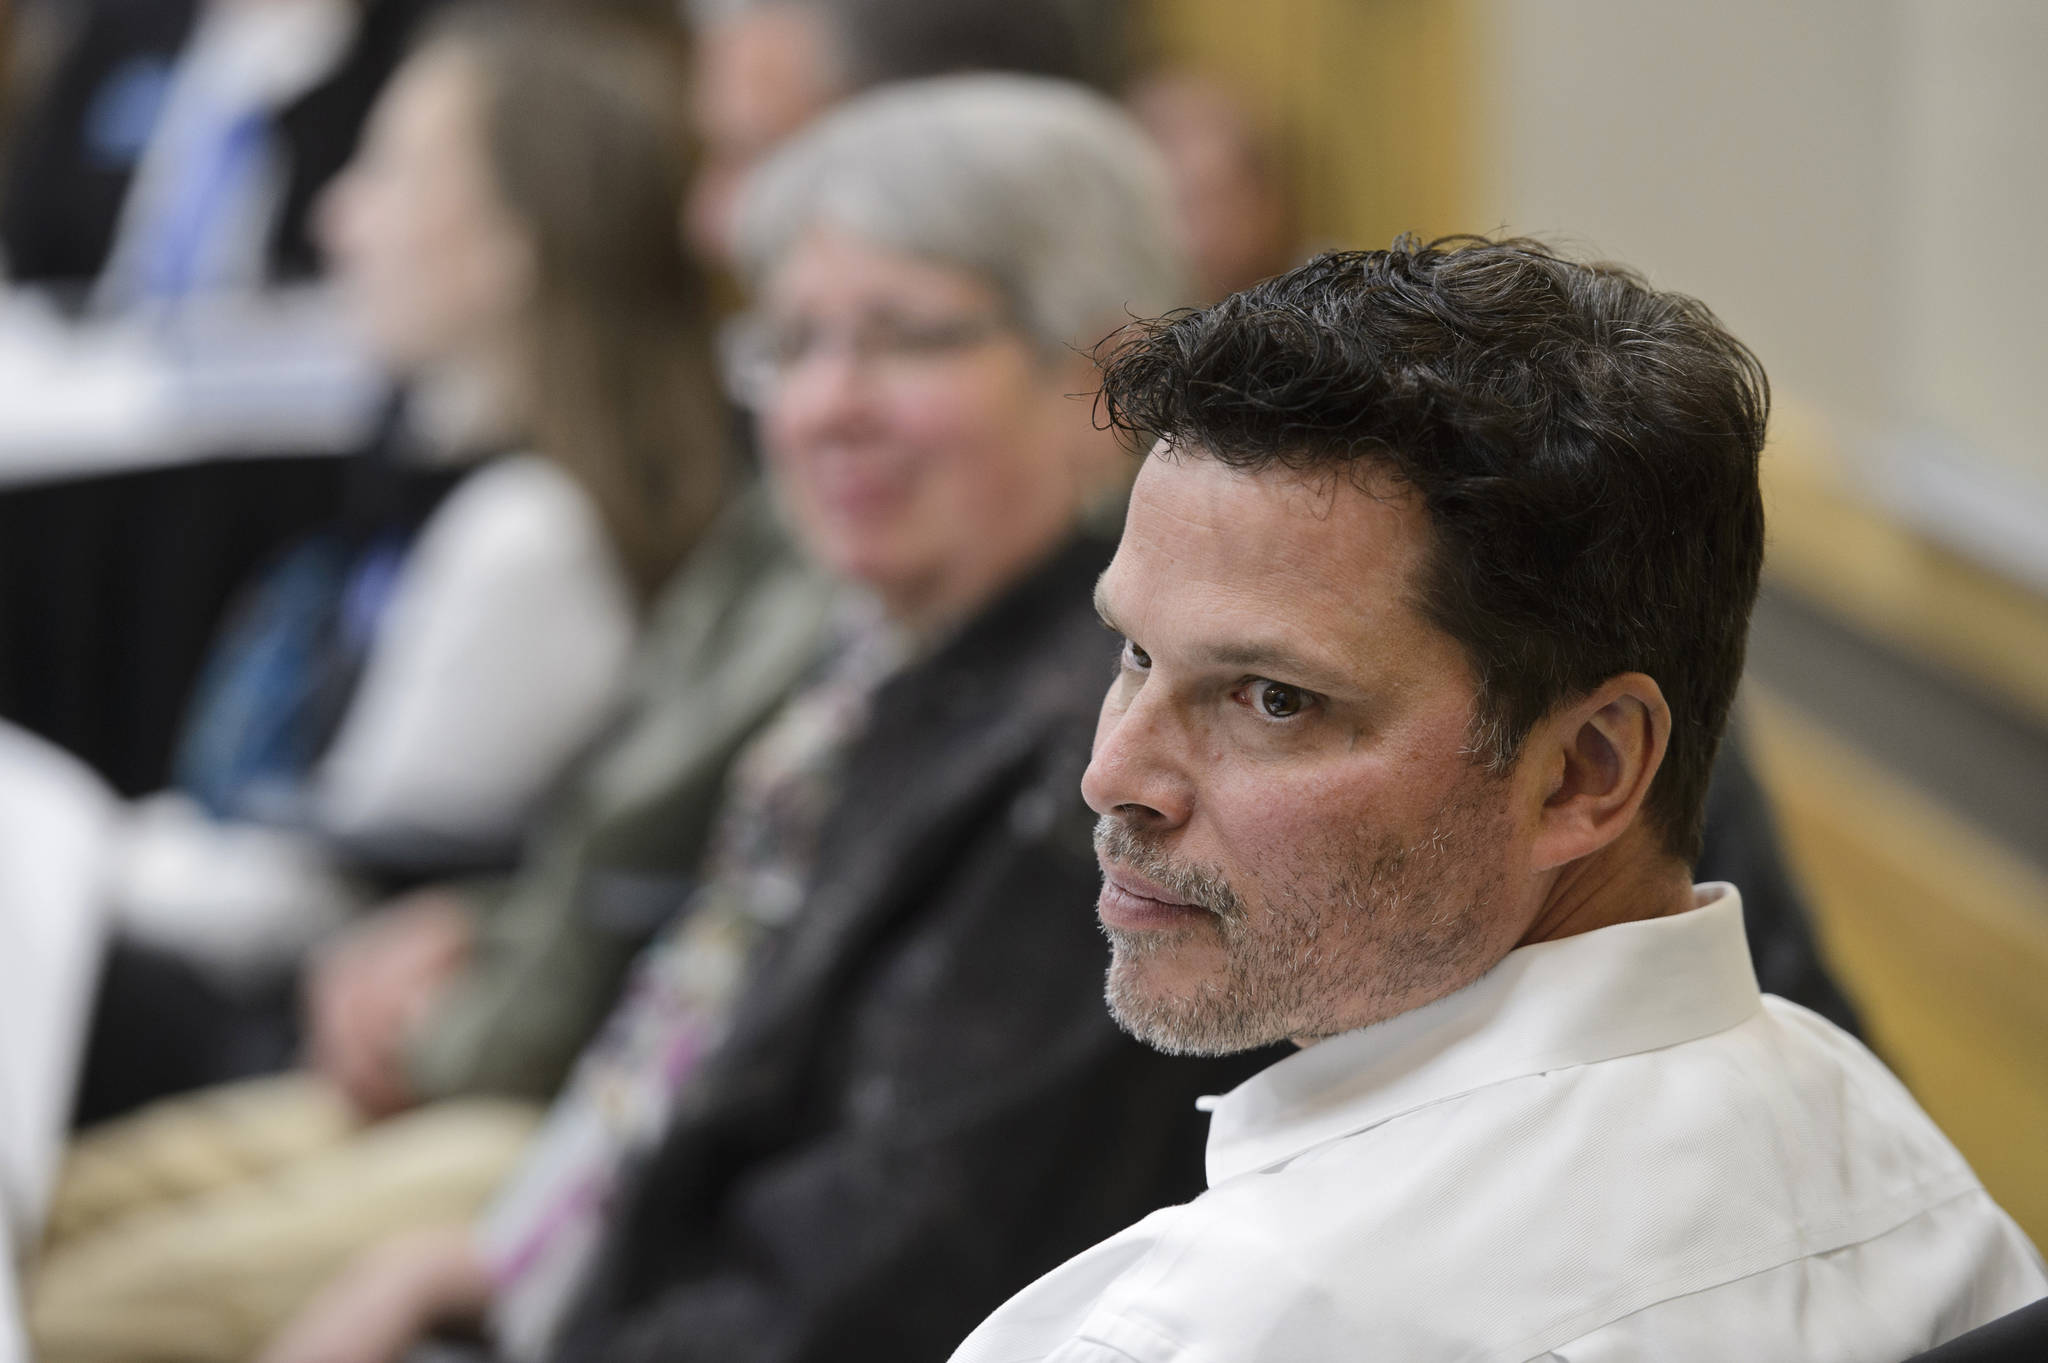 University of Alaska Board of Regents member Andy Teuber listens to a discussion during a meeting at UAA on Sept. 12, 2019, in Anchorage, Alaska. The U.S. Coast Guard is searching for an overdue helicopter piloted by Teuber who is the former head of the Alaska Native Tribal Health Consortium. Teuber had resigned last week after allegations of sexual misconduct surfaced against him which he denied. Teuber left Anchorage about 2 p.m. Tuesday, March 2, 2021, in a black and white Robinson R66 helicopter en route to Kodiak Island. (Marc Lester/Anchorage Daily News via AP)